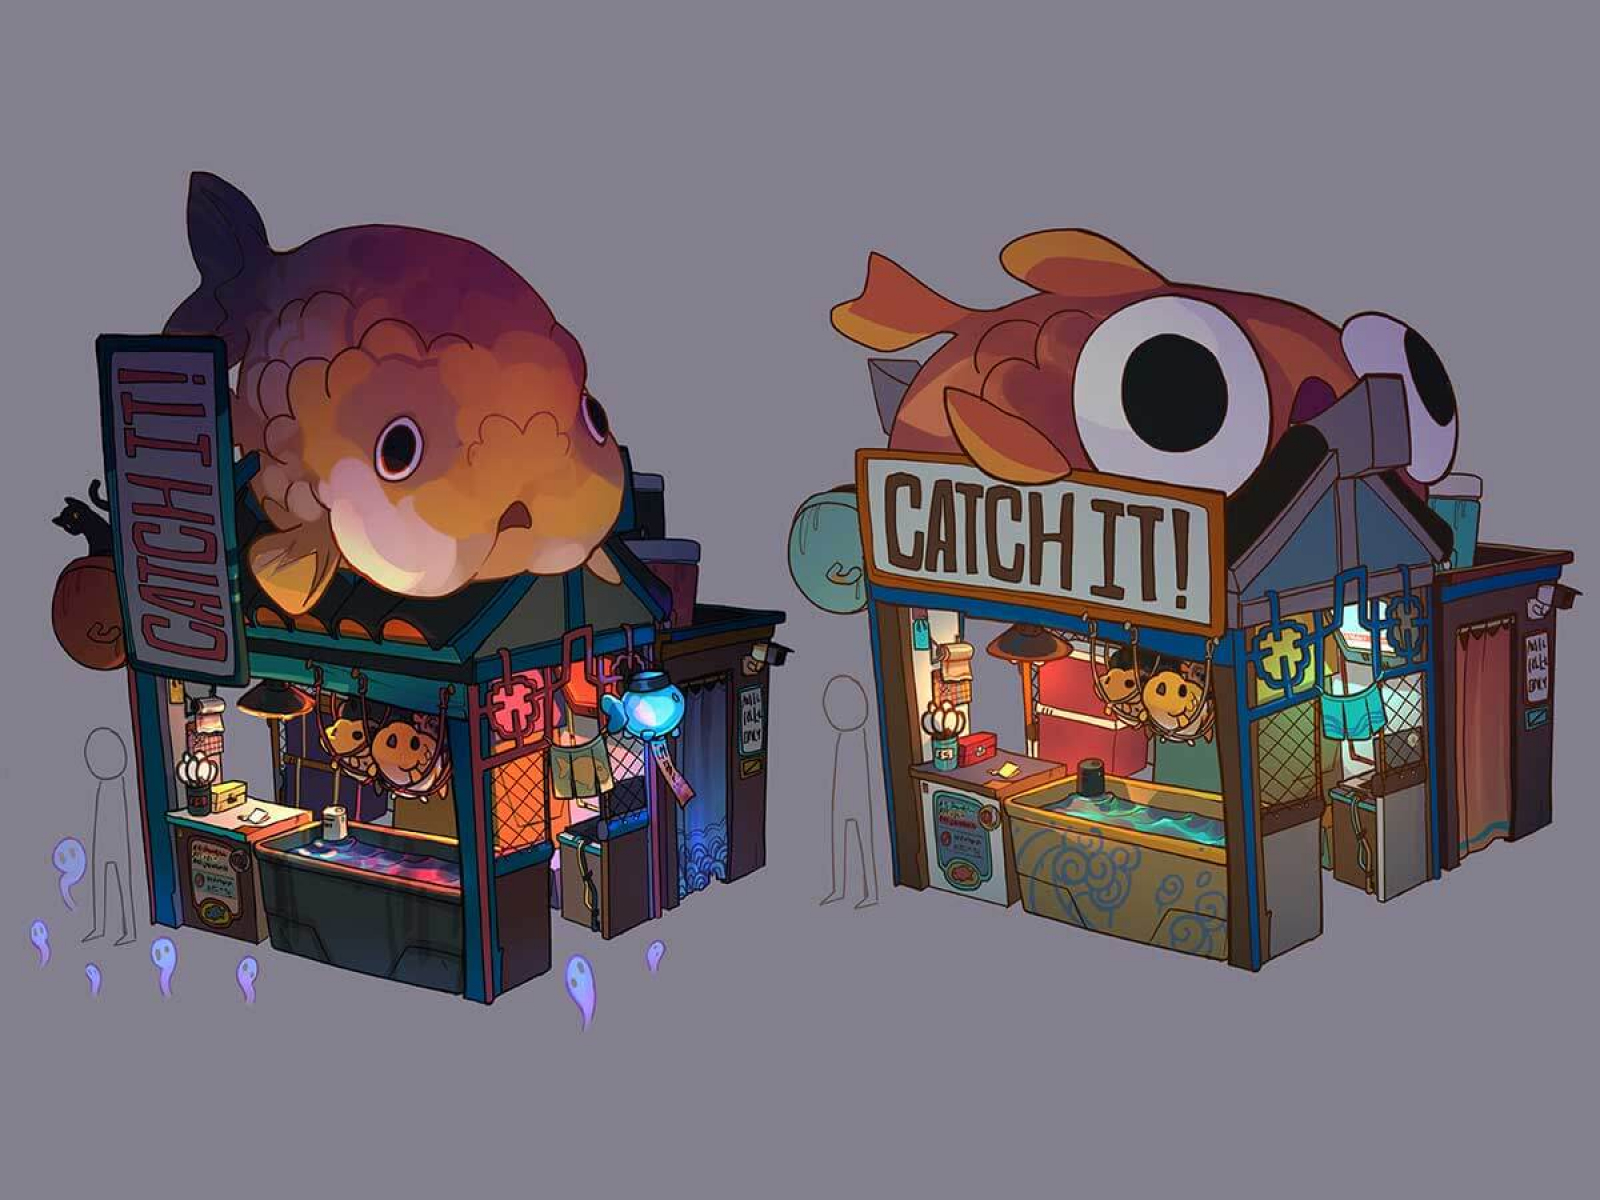 Two colorful shops with intricate fish decor.